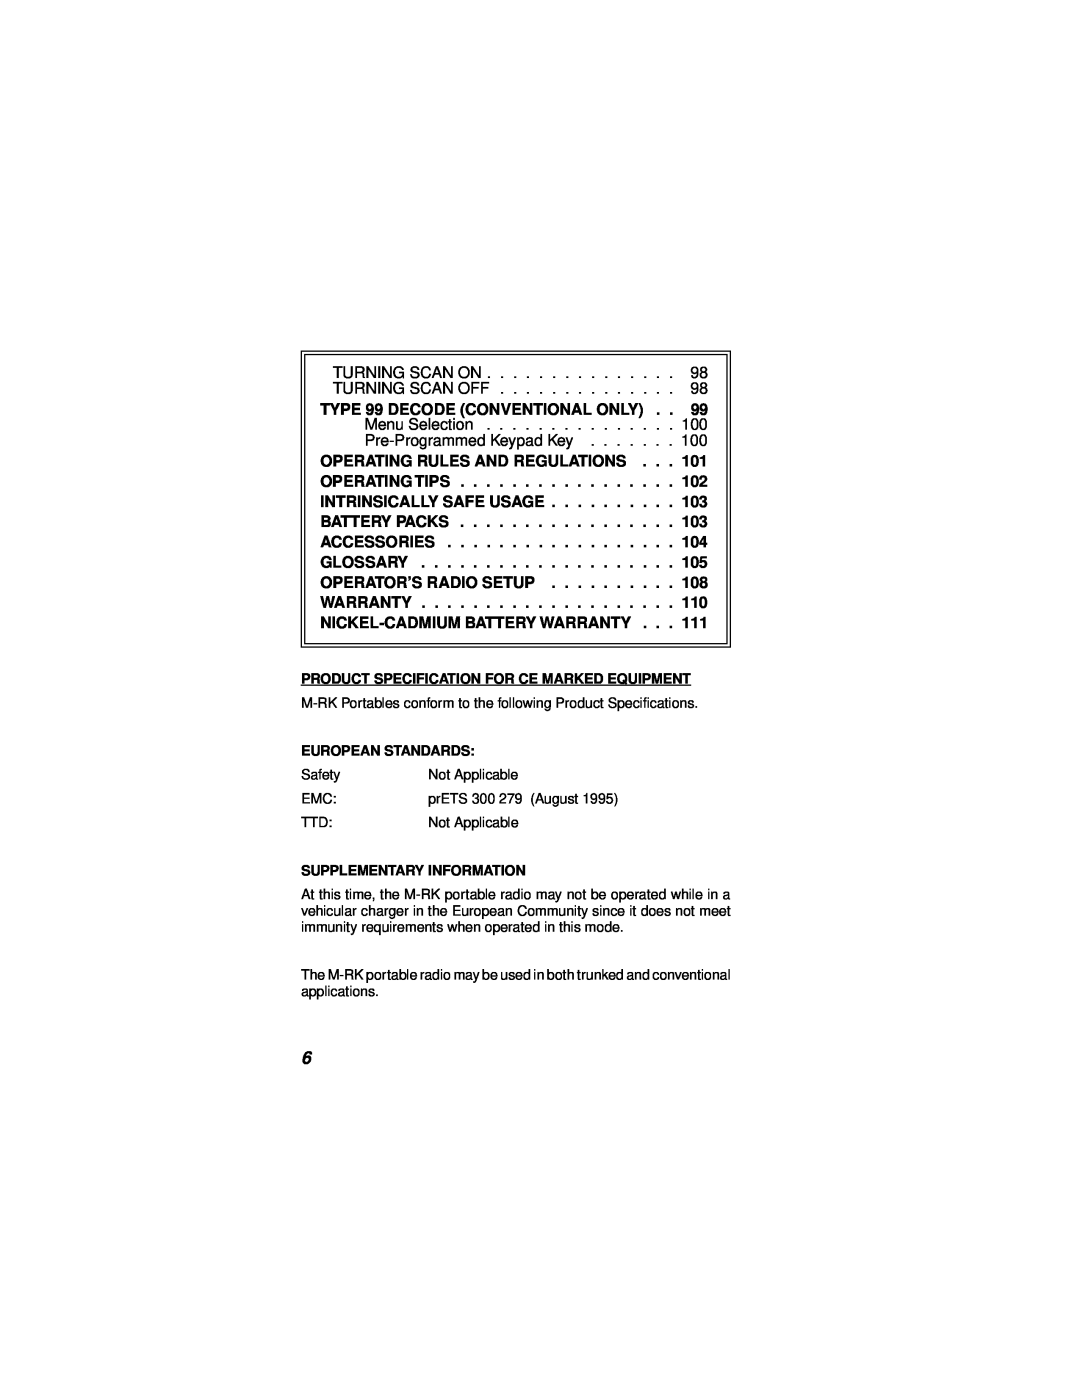 Ericsson LBI-38732E manual Product Specification For Ce Marked Equipment, European Standards, Supplementary Information 